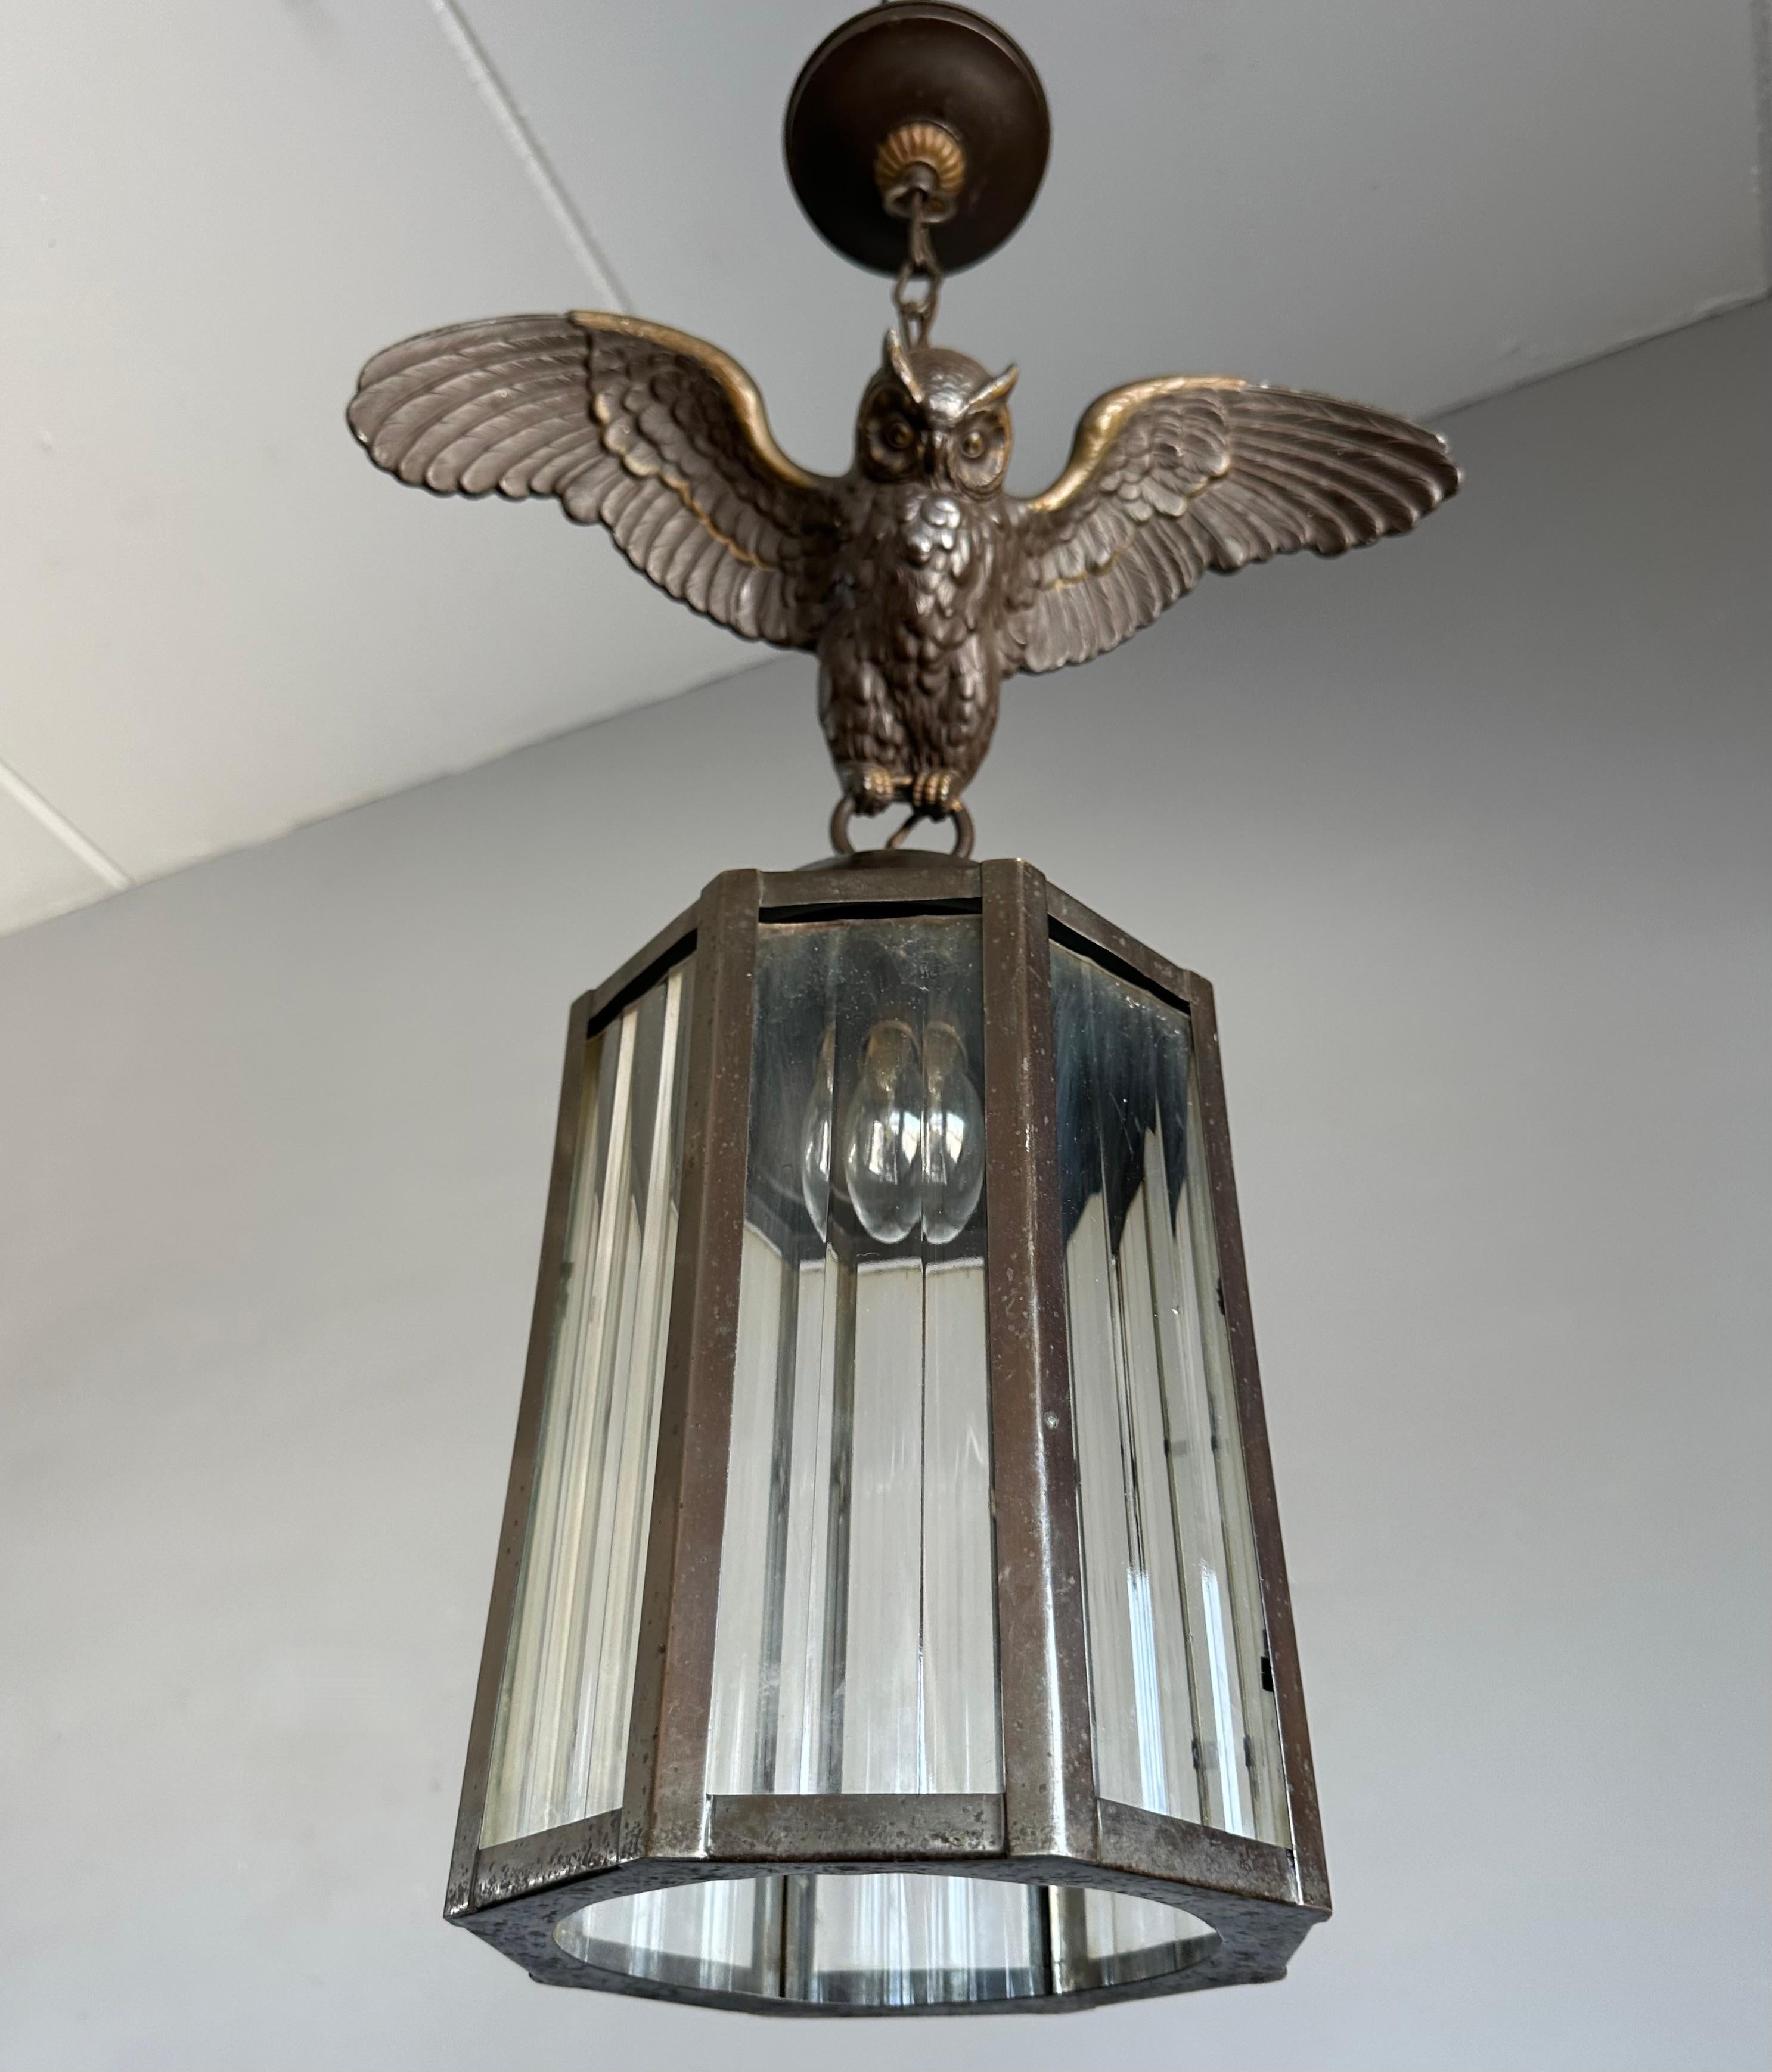 European Arts and Crafts Era Flying Owl Sculpture Pendant Light or Lantern with Cut Glass For Sale